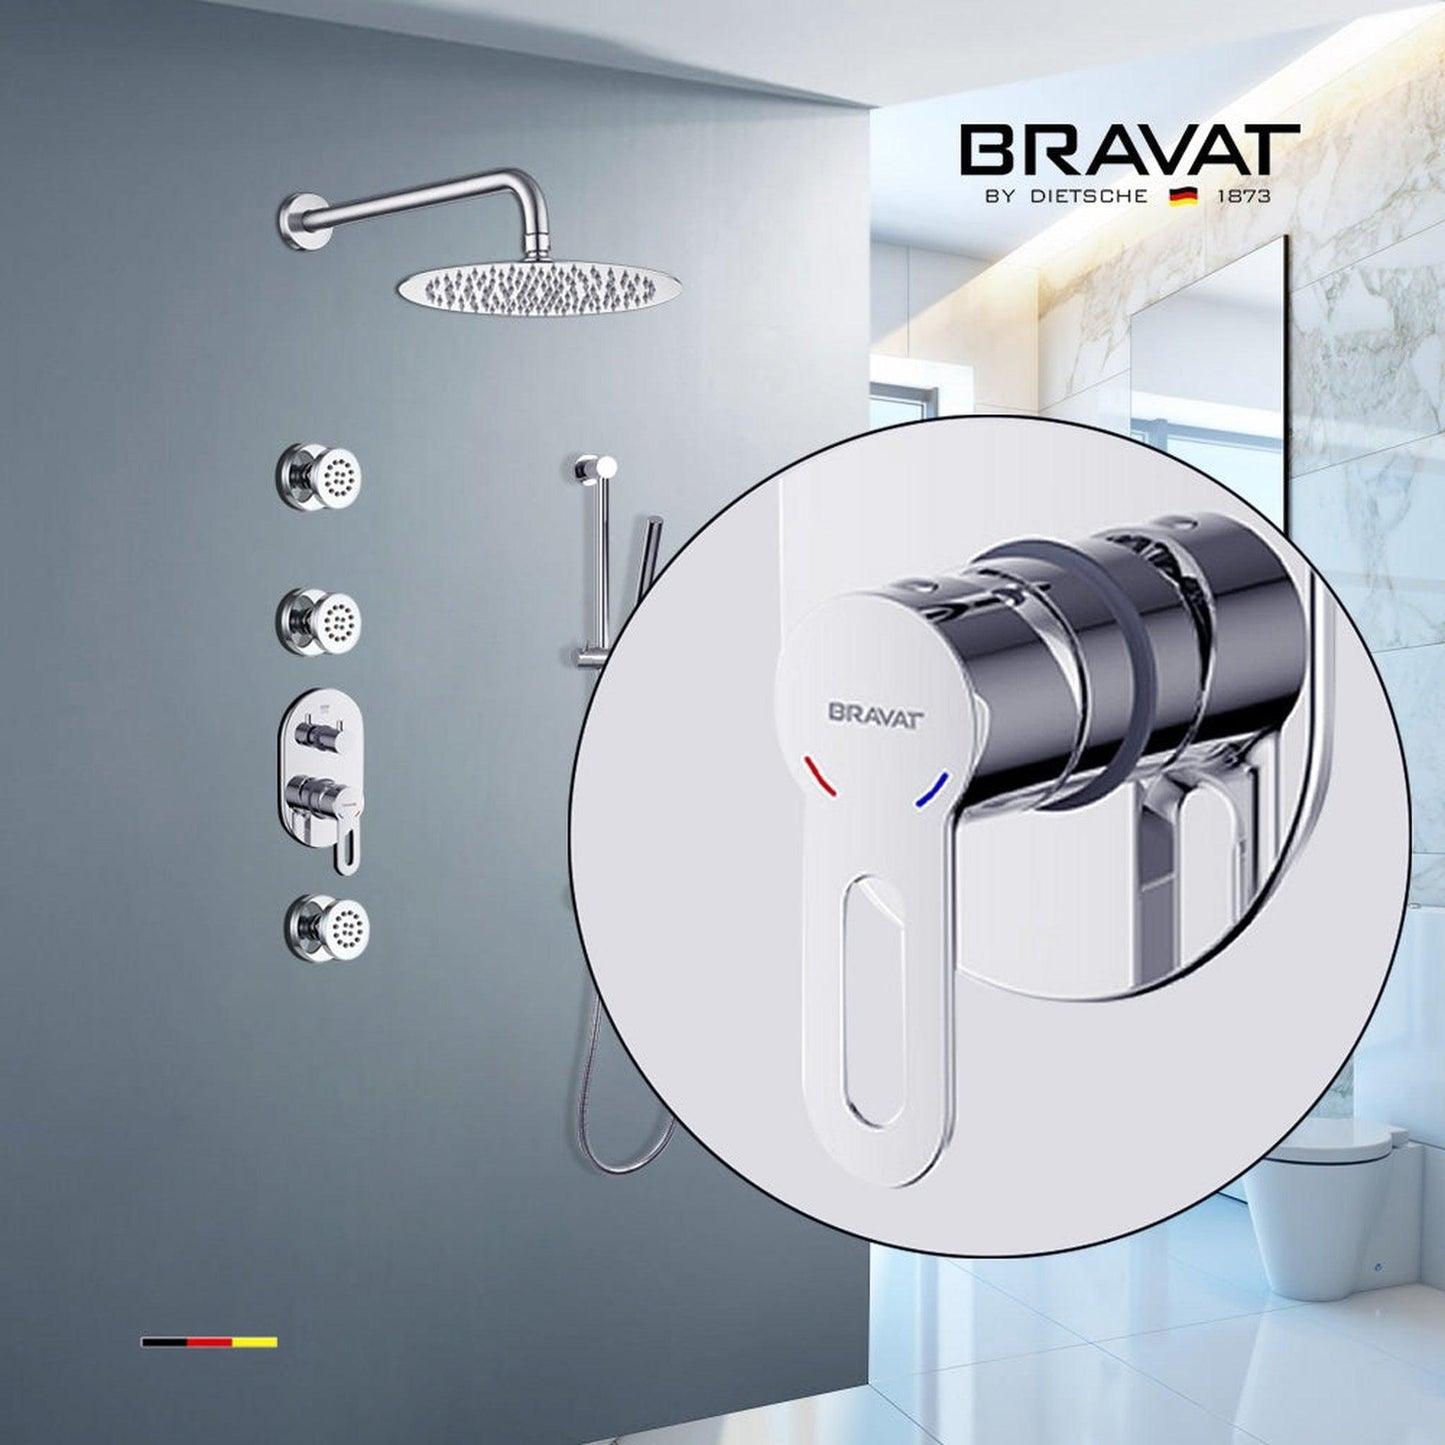 Fontana Bravat 16" Chrome Wall Mounted Thermostatic Rainfall Shower System With 3-Jet Body Sprays and Hand Shower